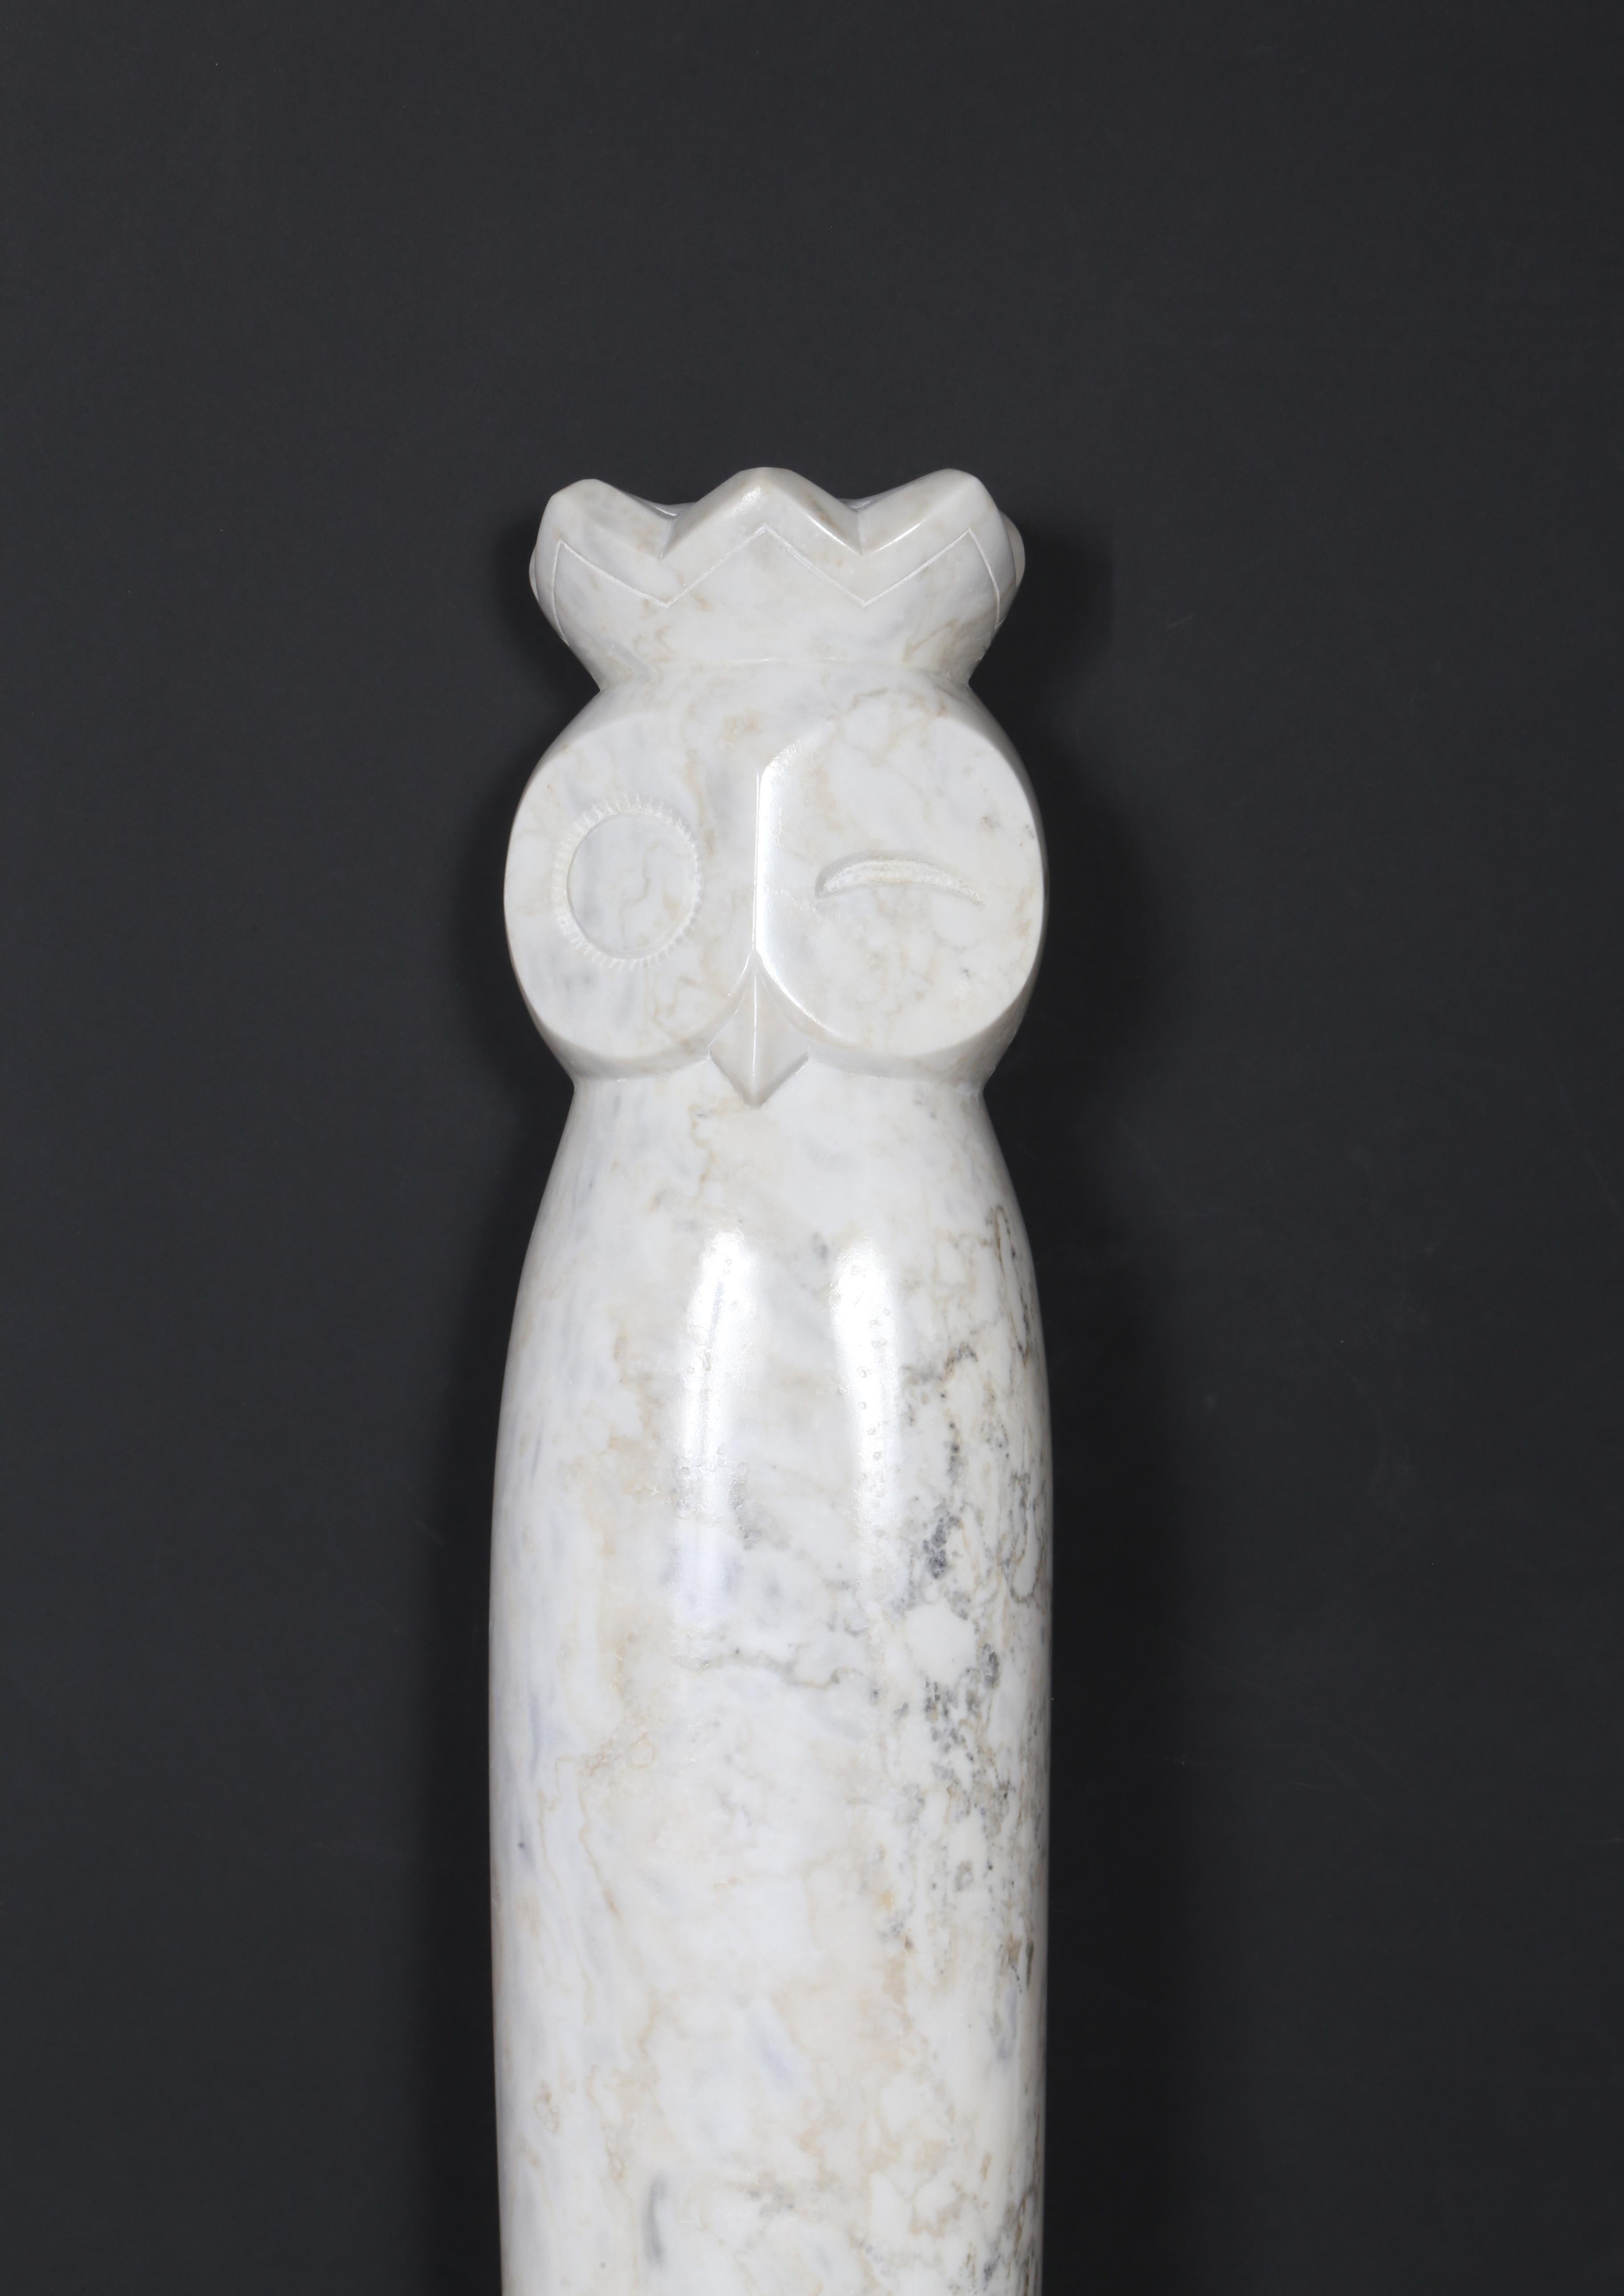 An original carved marble sculpture by Constantin Antonovici from his Owl Series. Referenced in 